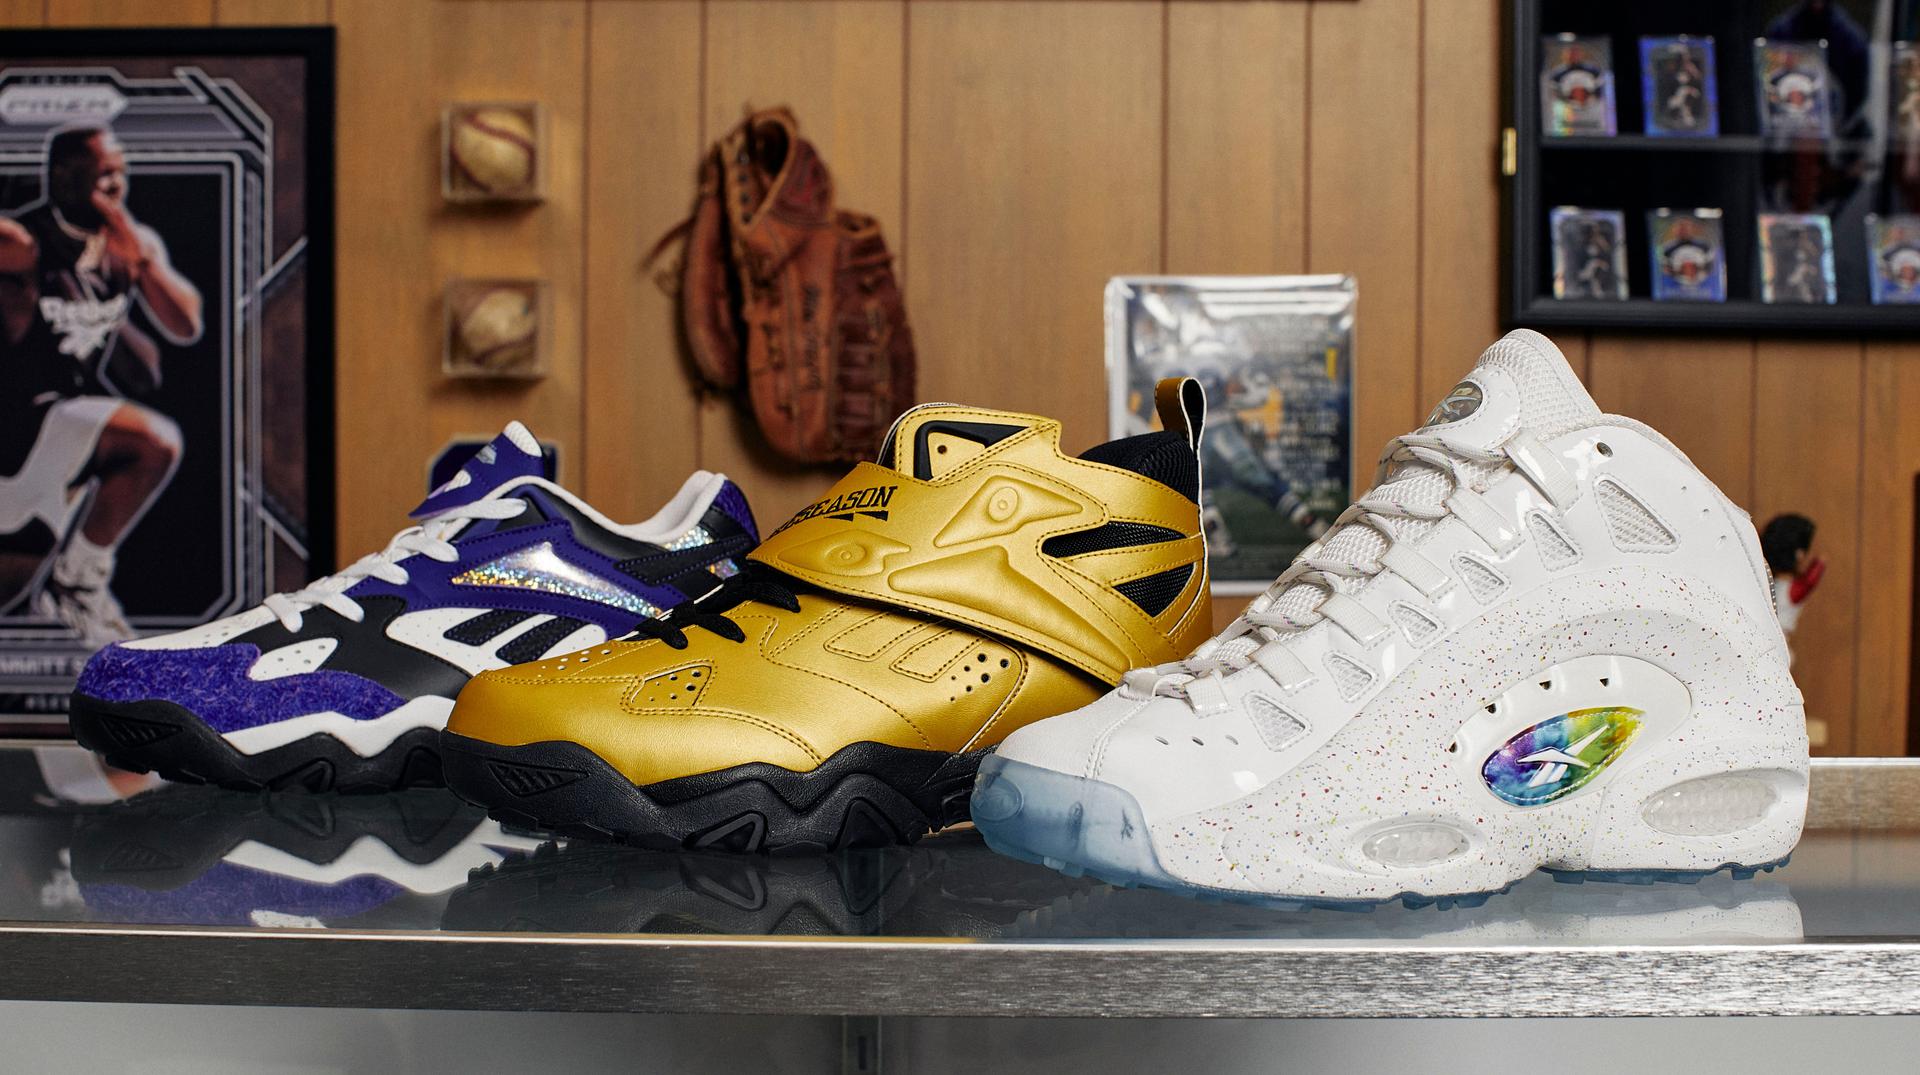 Panini, Reebok to release Prizm-inspired Emmitt Smith sneaker, card collection